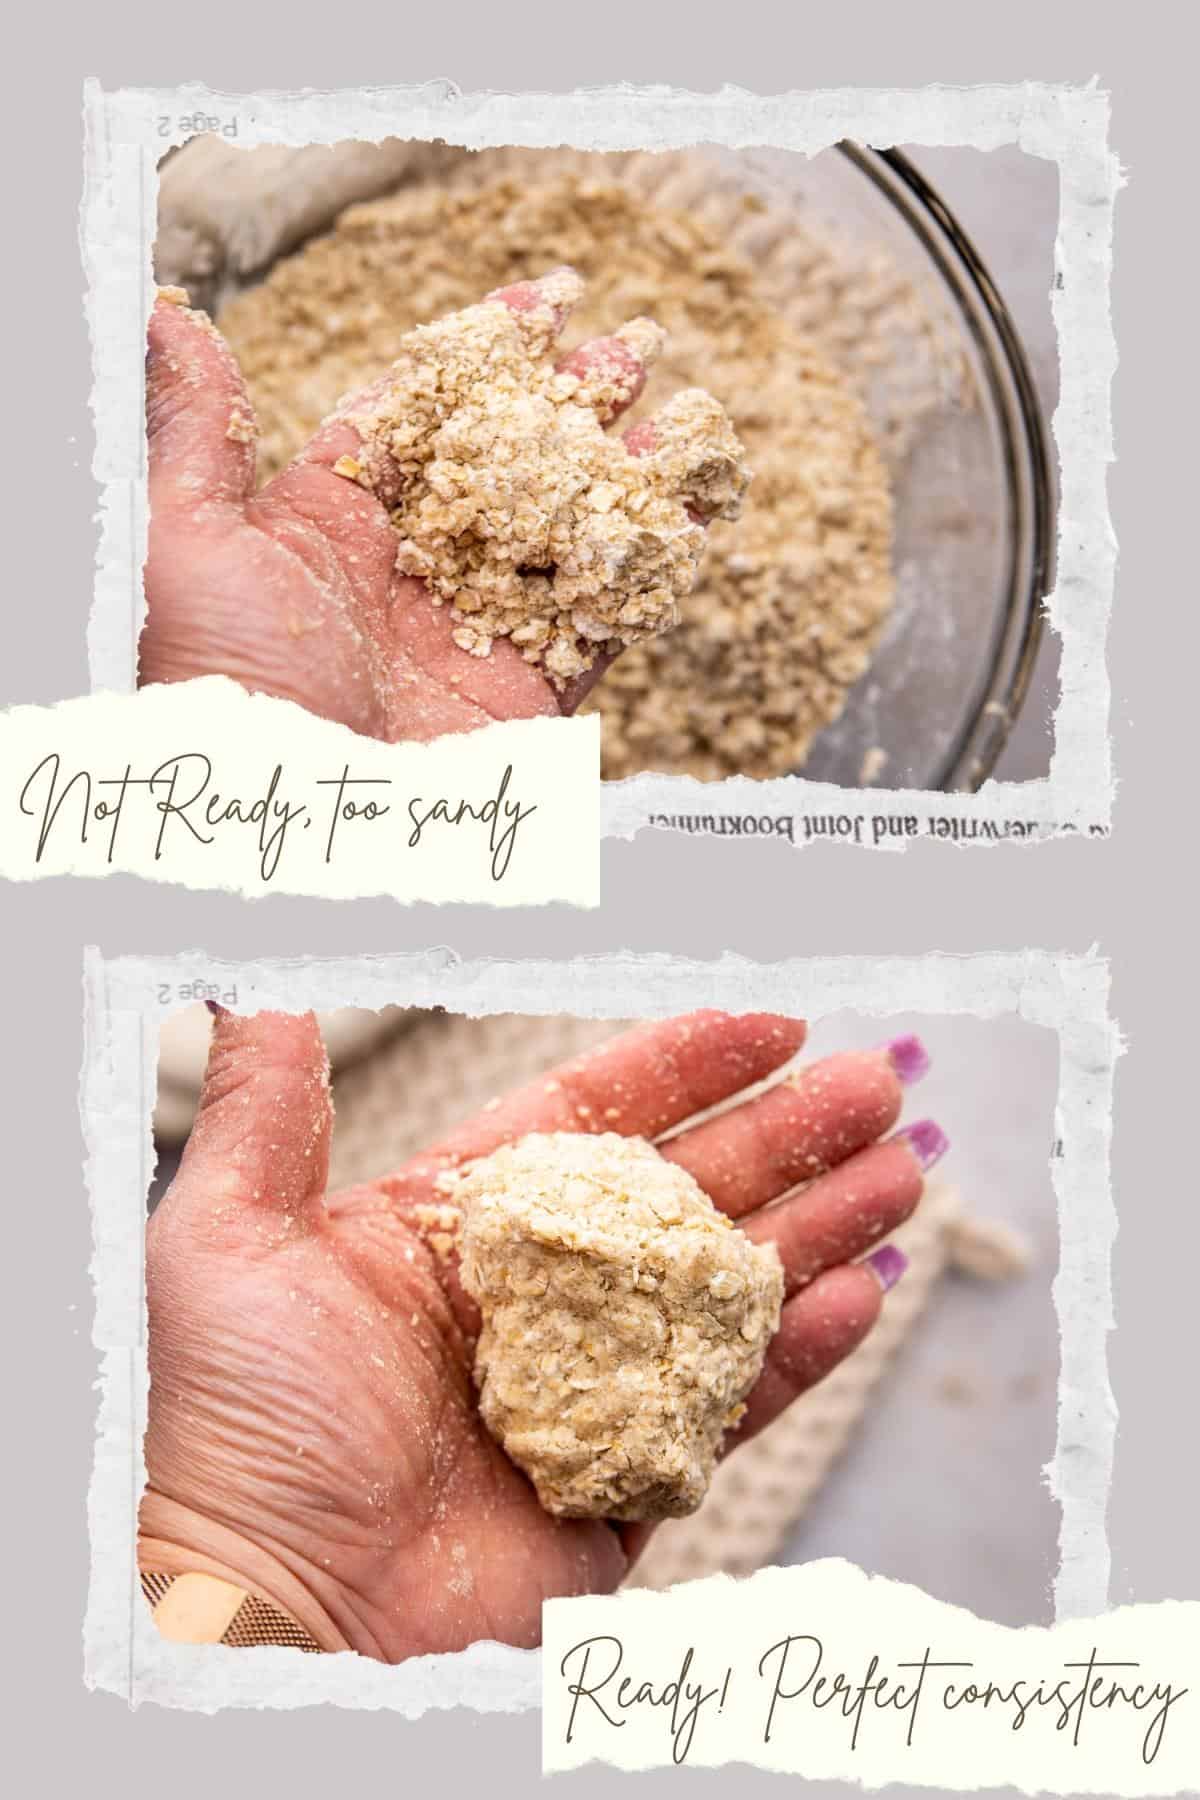 Two pictures of a woman holding oatmeal toppings in her hand.